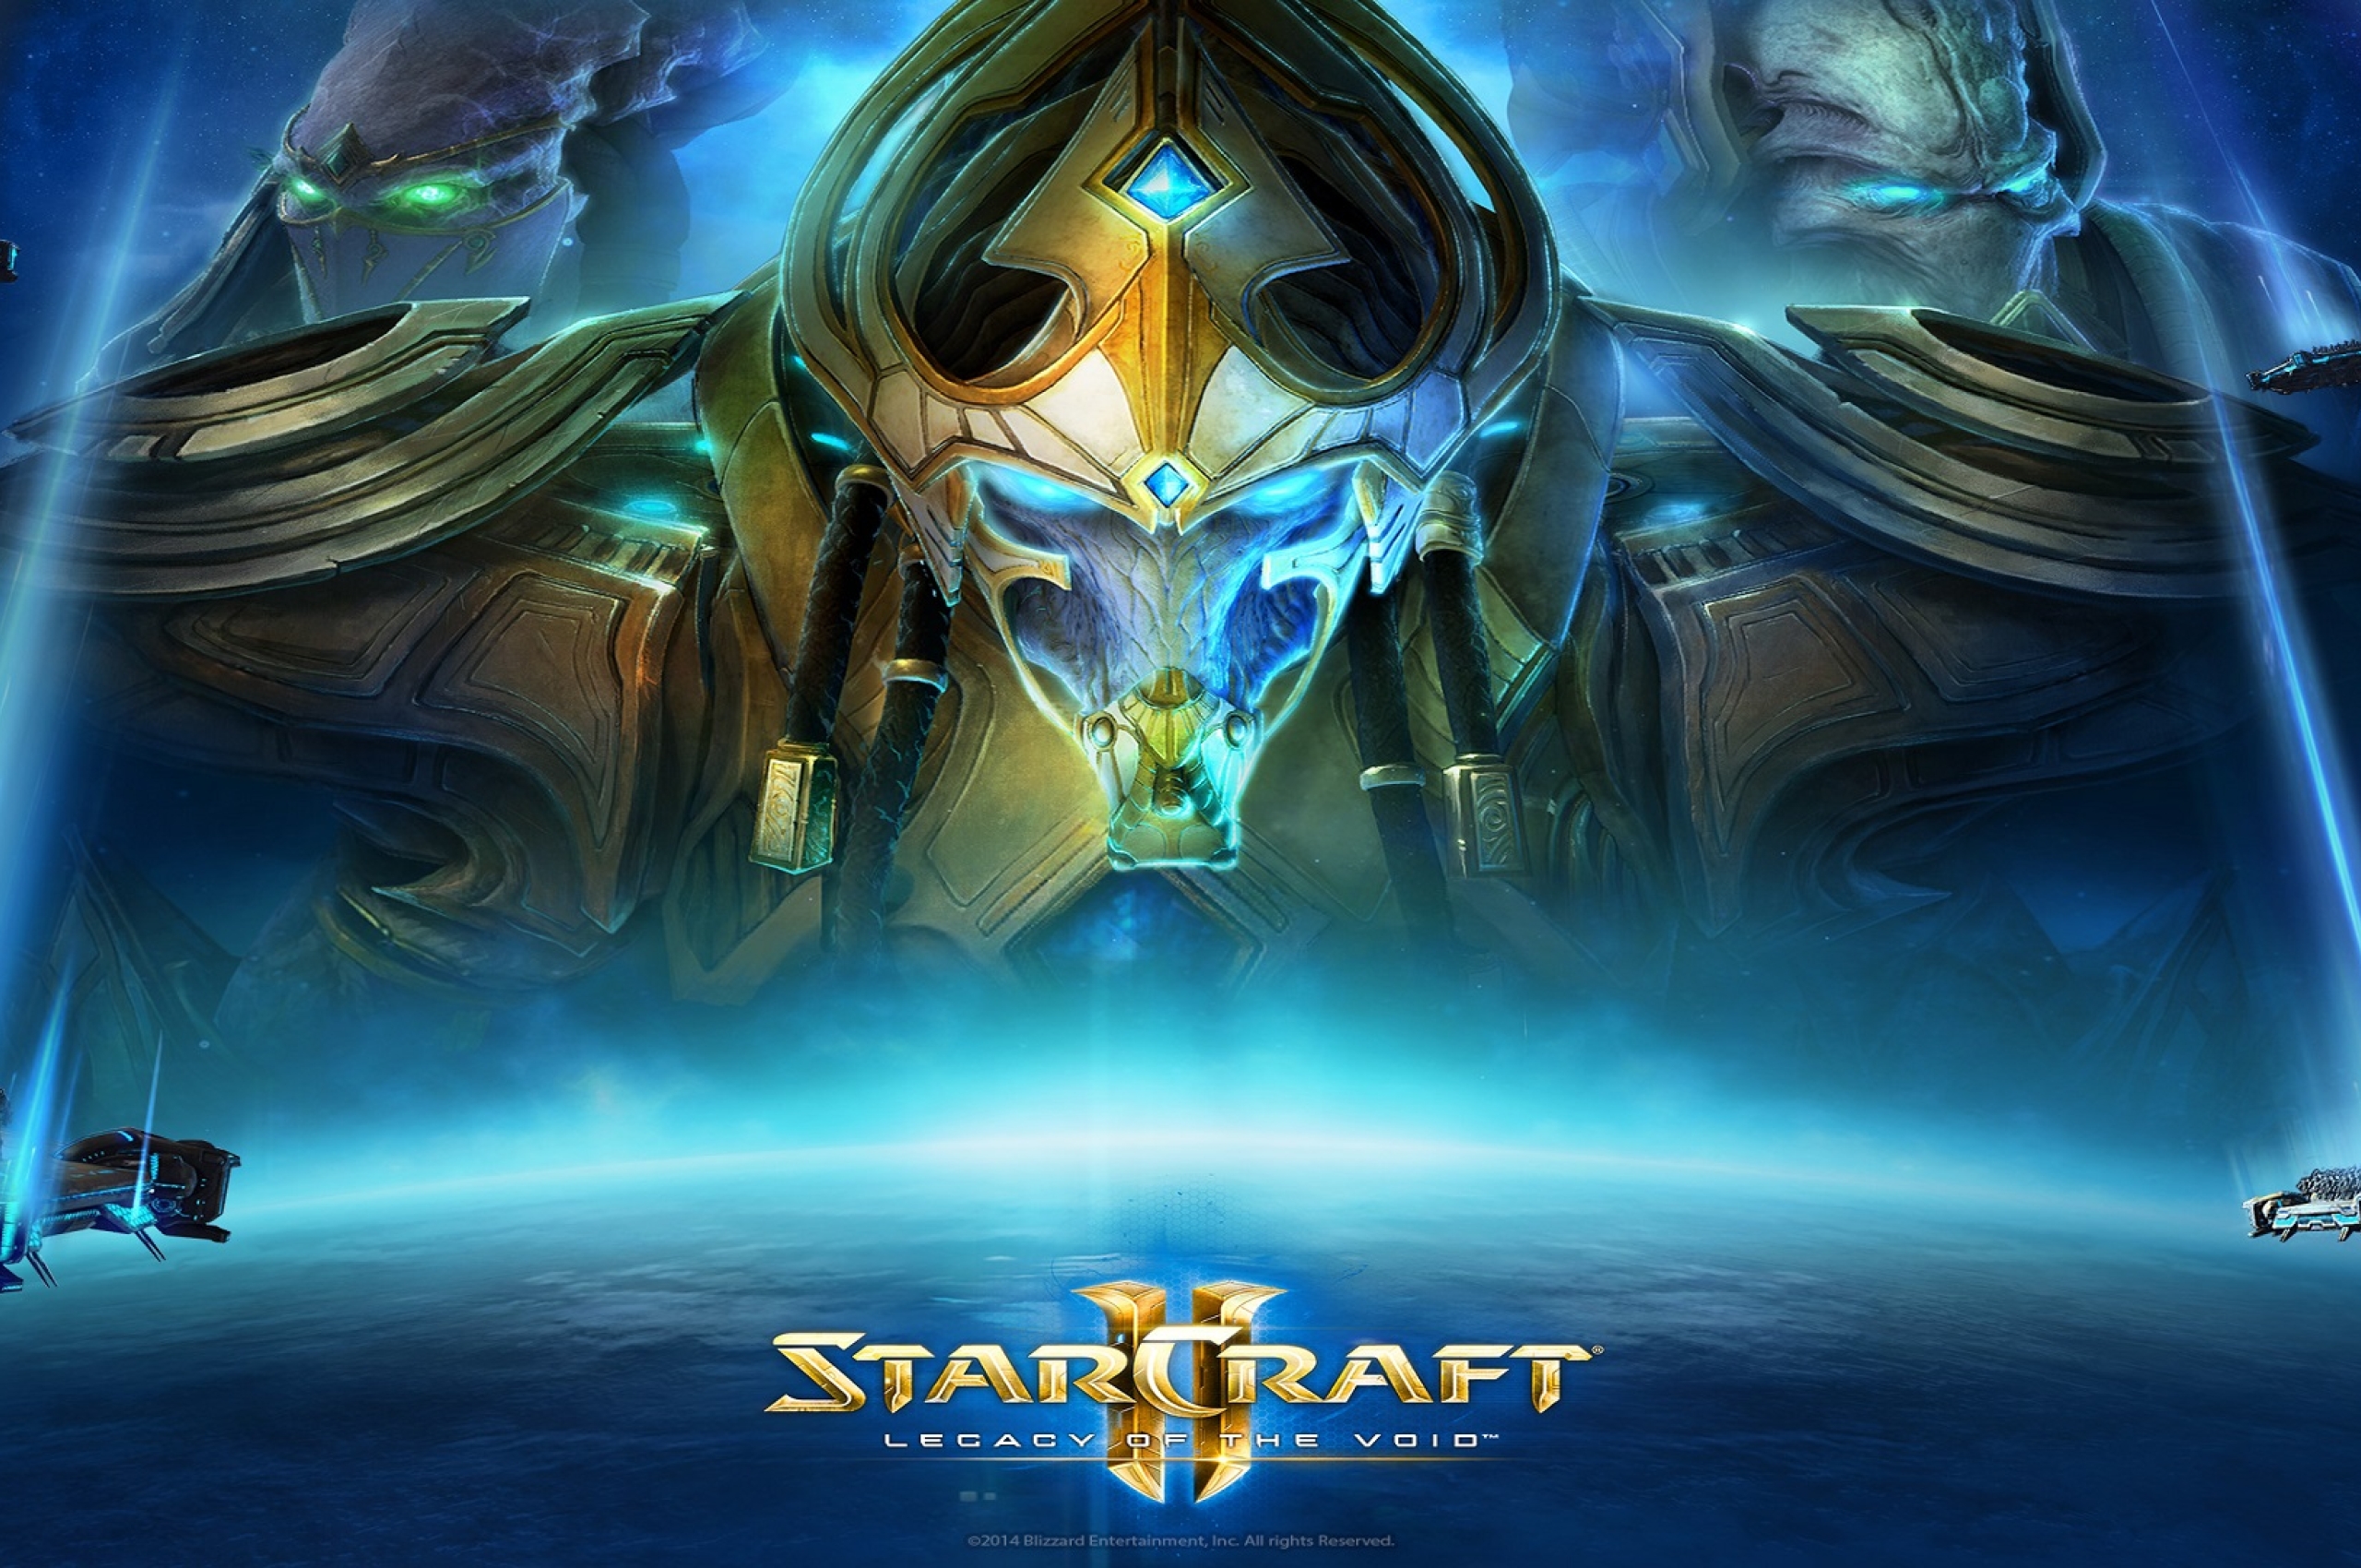 Voices of the void craft. STARCRAFT II Legacy of the Void. Протосы старкрафт 2 арт. Старкрафт 2 предвестие тьмы. STARCRAFT 2 Фантом.